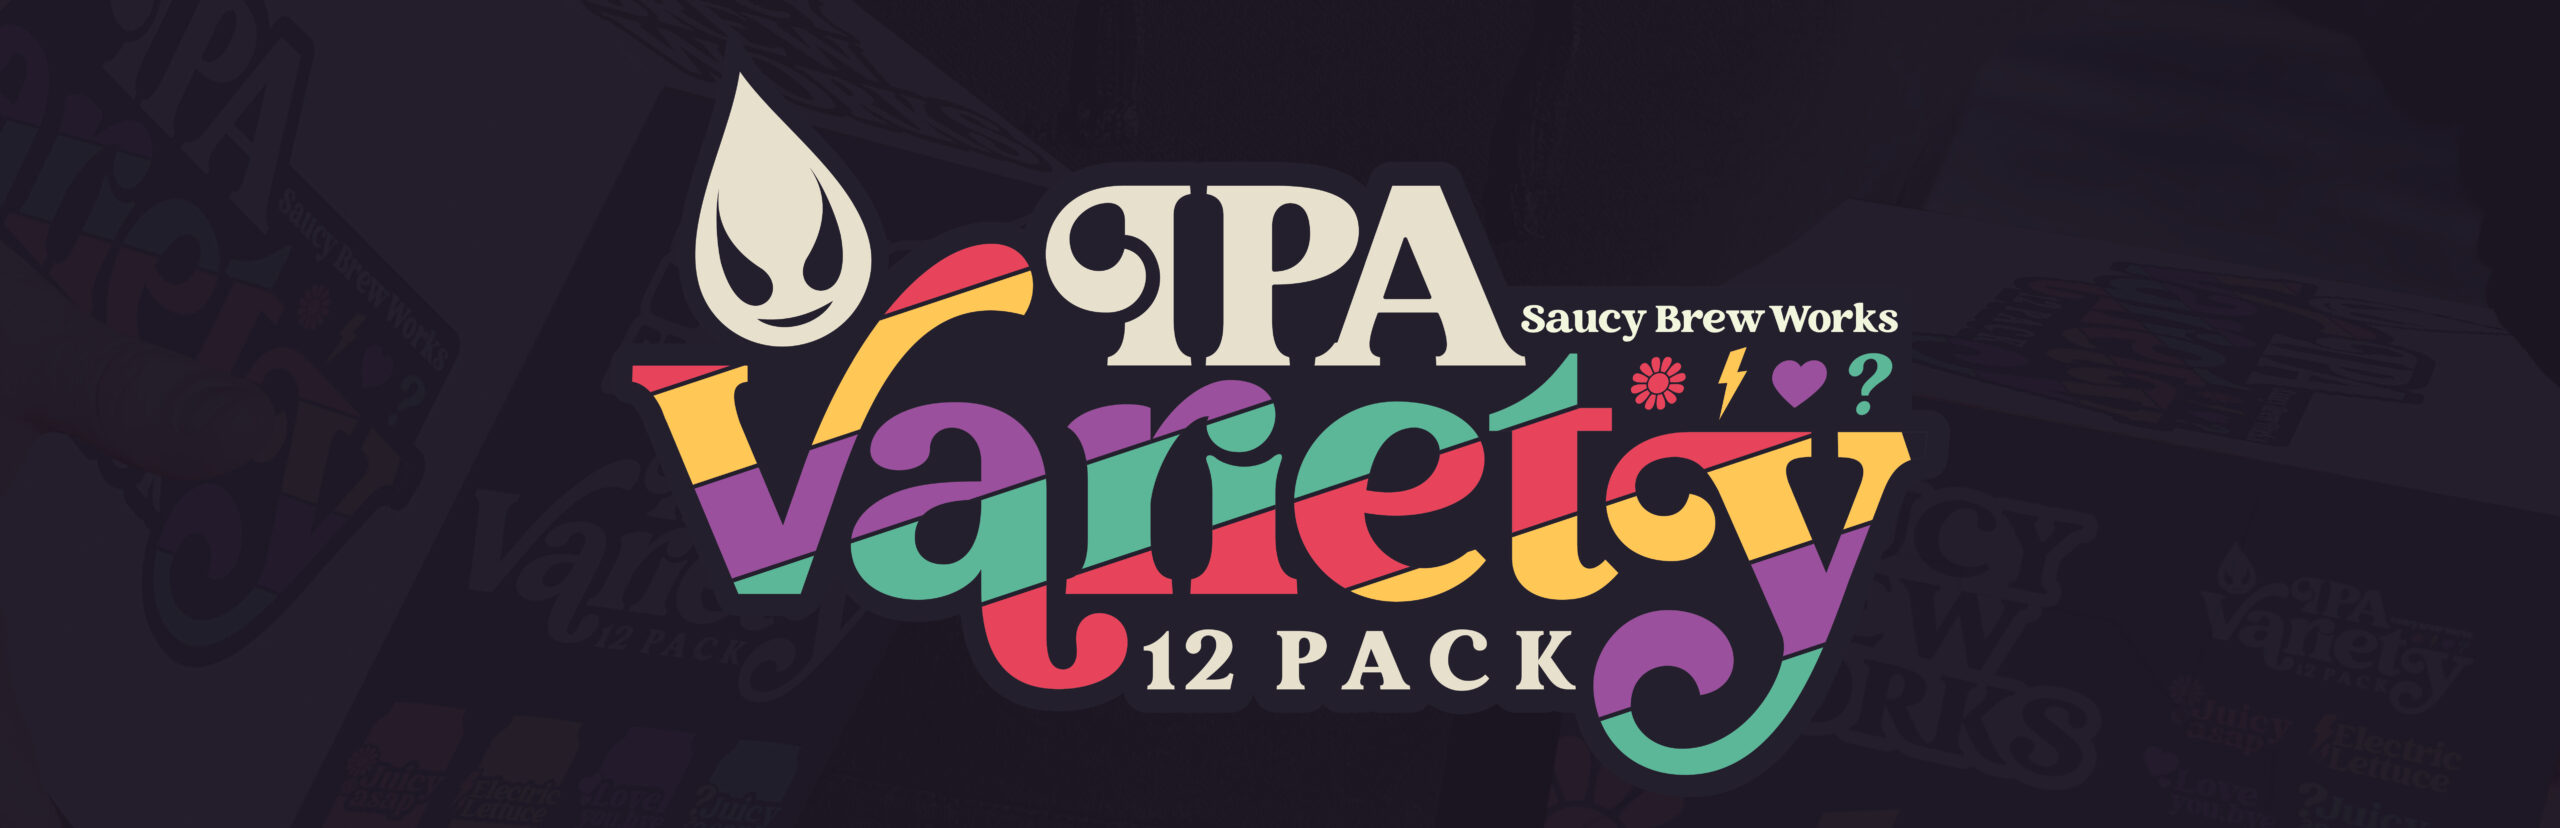 Saucy Brew Works IPA variety 12 pack